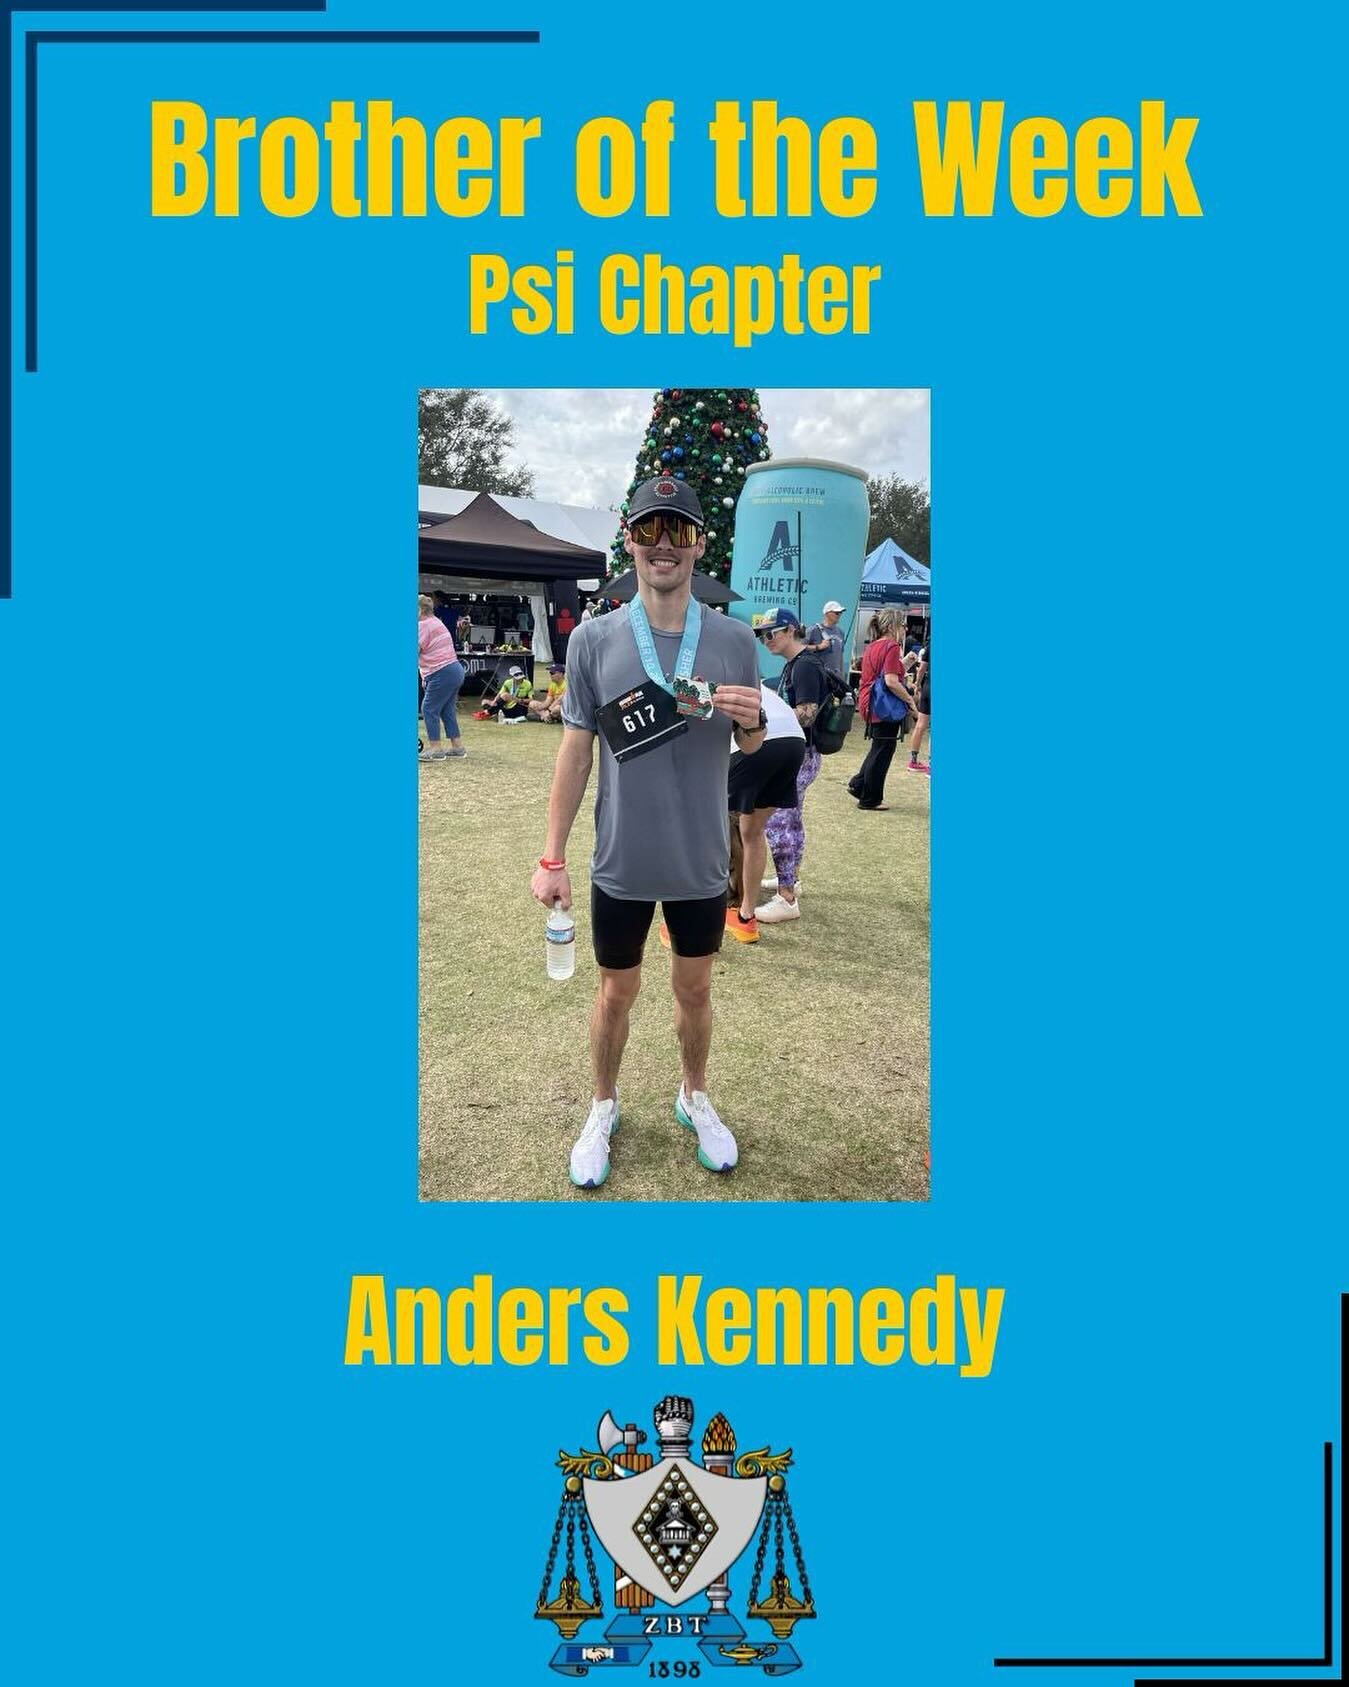 Brother of the Week Spotlight: congratulations to our outstanding brother, Anders Kennedy! Not only has he consistently shown dedication and leadership within our chapter, but he also just conquered his first Half Iron Man Triathlon. Talk about setti